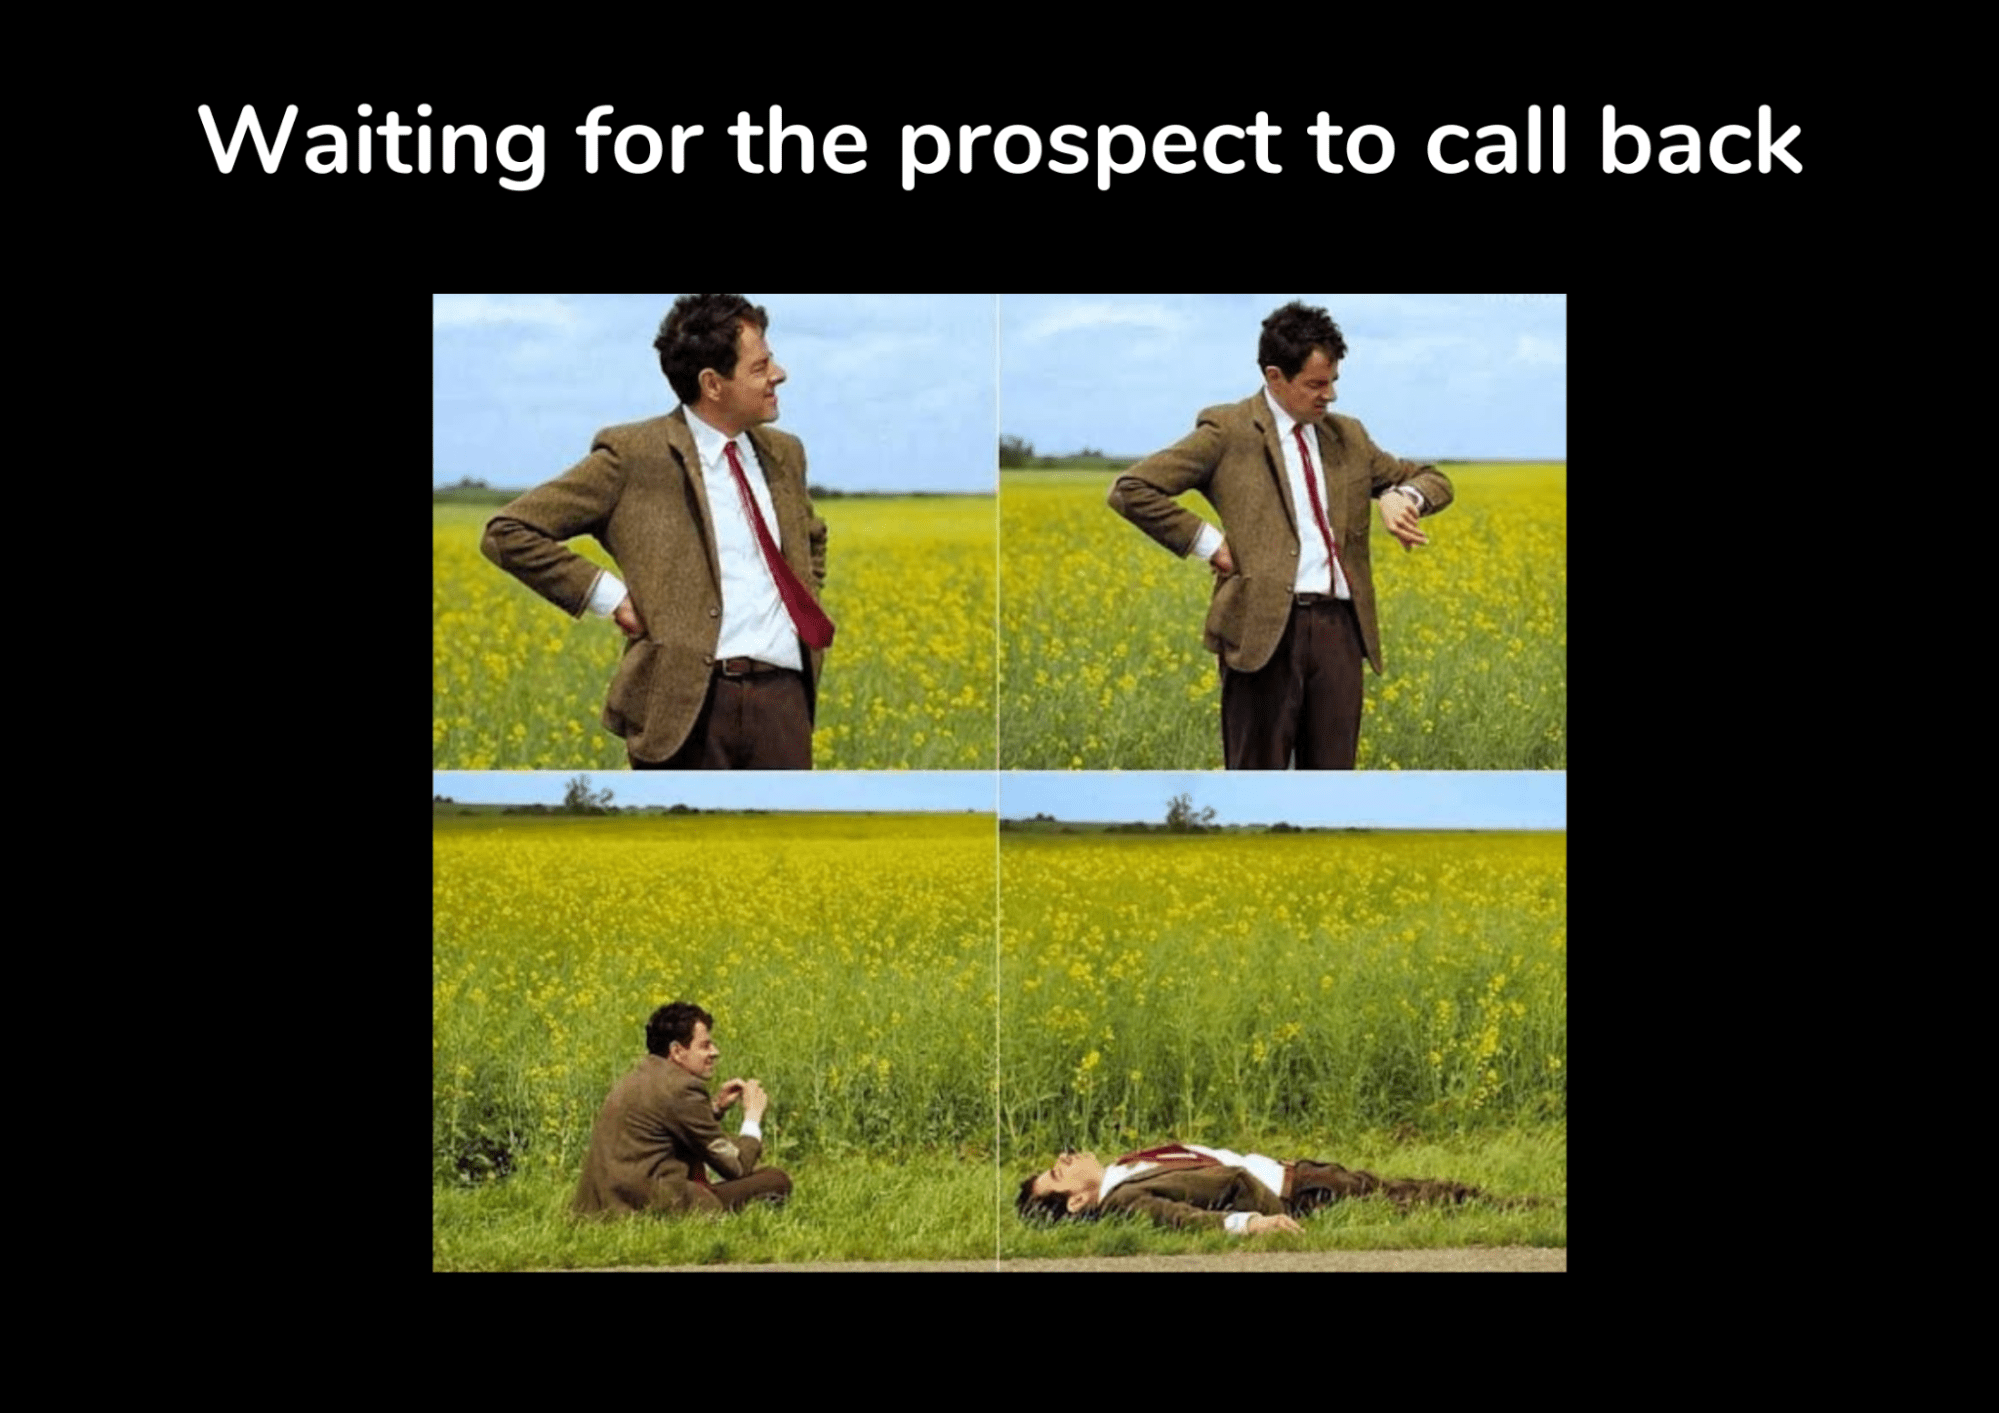 Sales meme from one of the 'Mr. Bean' series